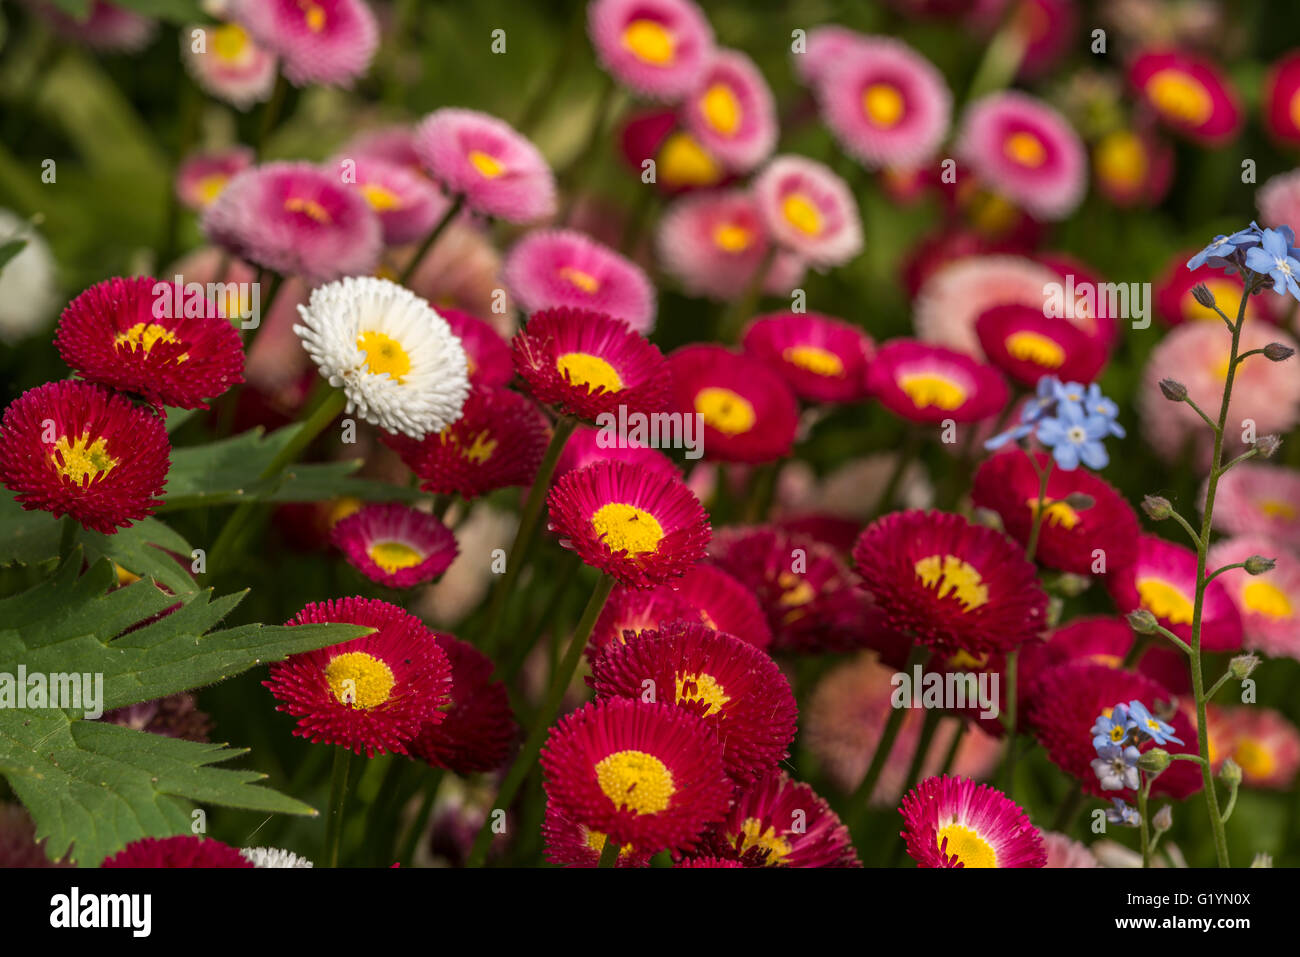 Nice red, white, pink daisy flowers on a sunny spring day at St.James Park in London Stock Photo